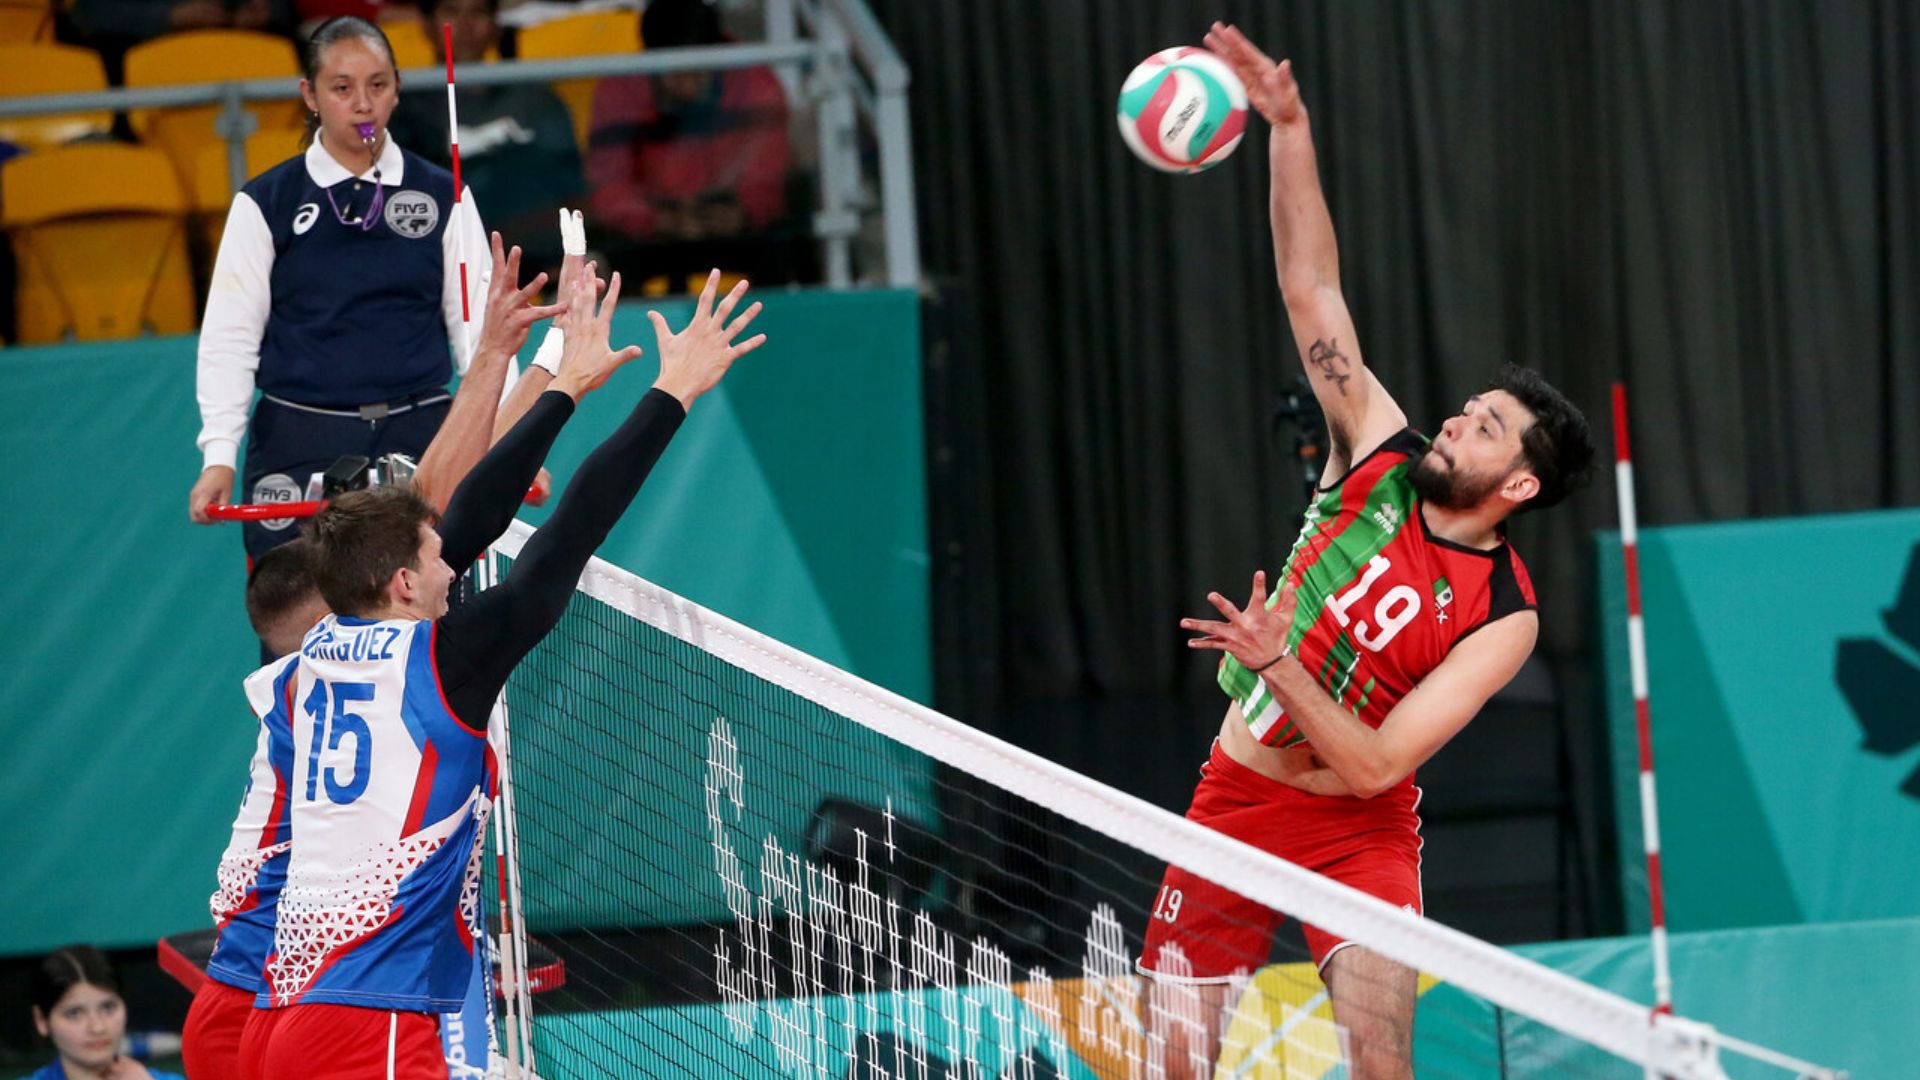 Volleyball: Mexico to Compete for Fifth Place After Victory Over Puerto Rico